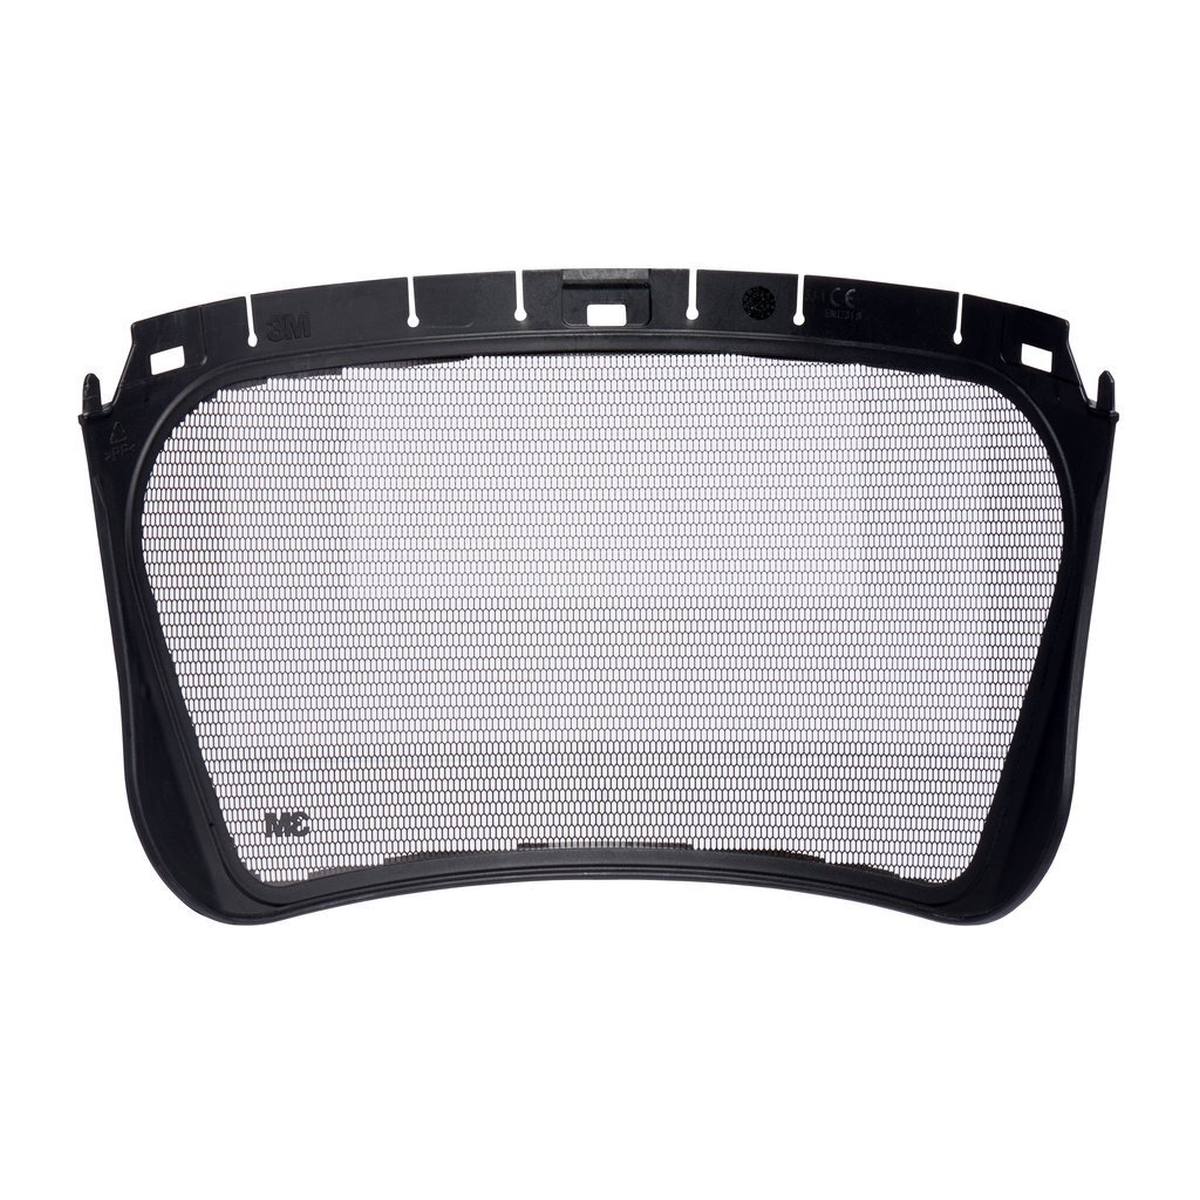 3M 5J Mesh visor Etched stainless steel Mesh size: 0.15mm Light reduction: min. 17%, max. 37%, Weight: 54g Available separately: V5 bracket for 3M safety helmets